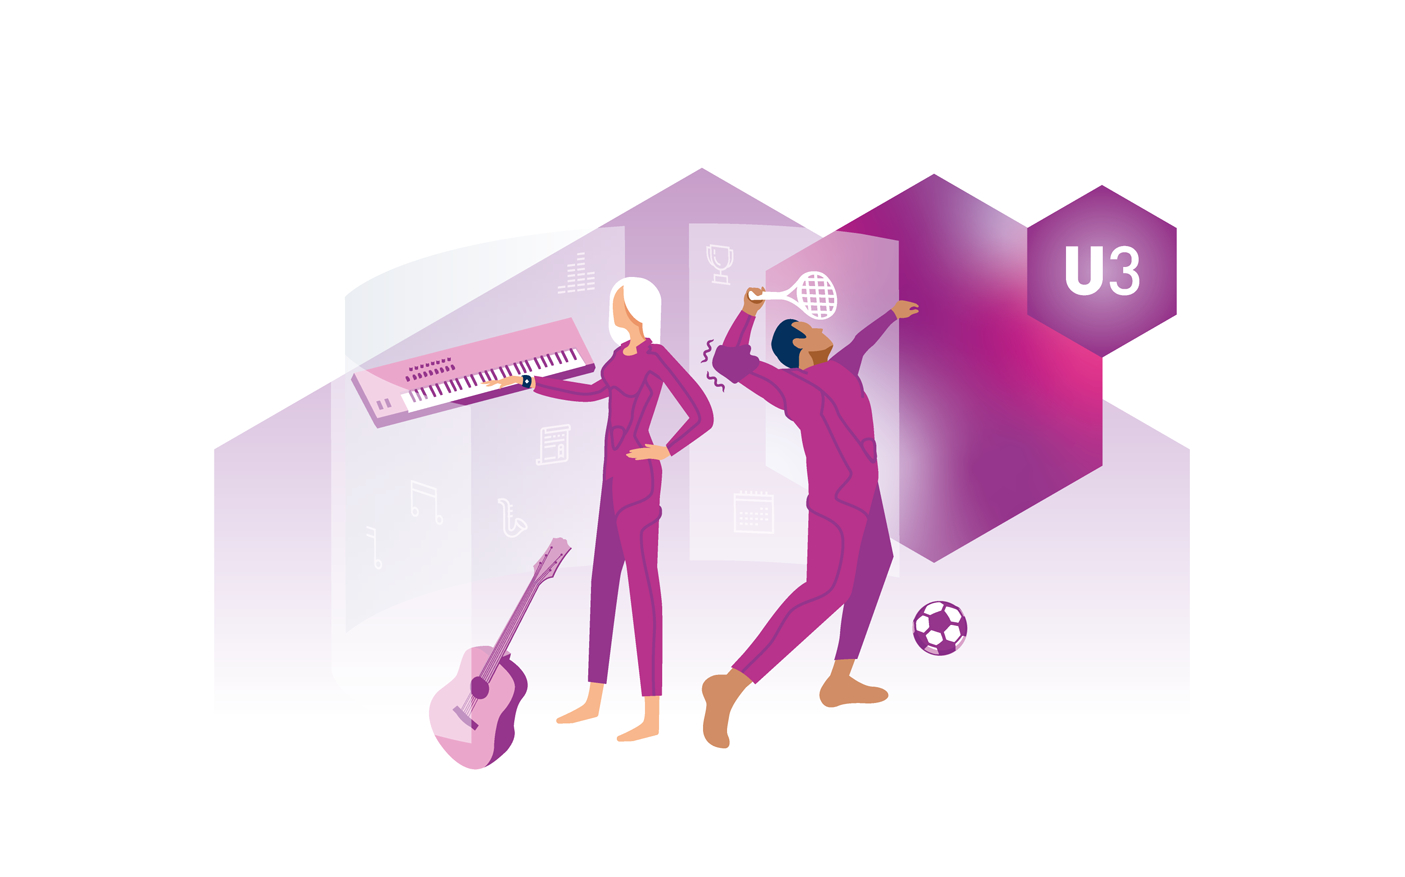 Purple and magenta graphic illustration depicting two people engaging in different activities